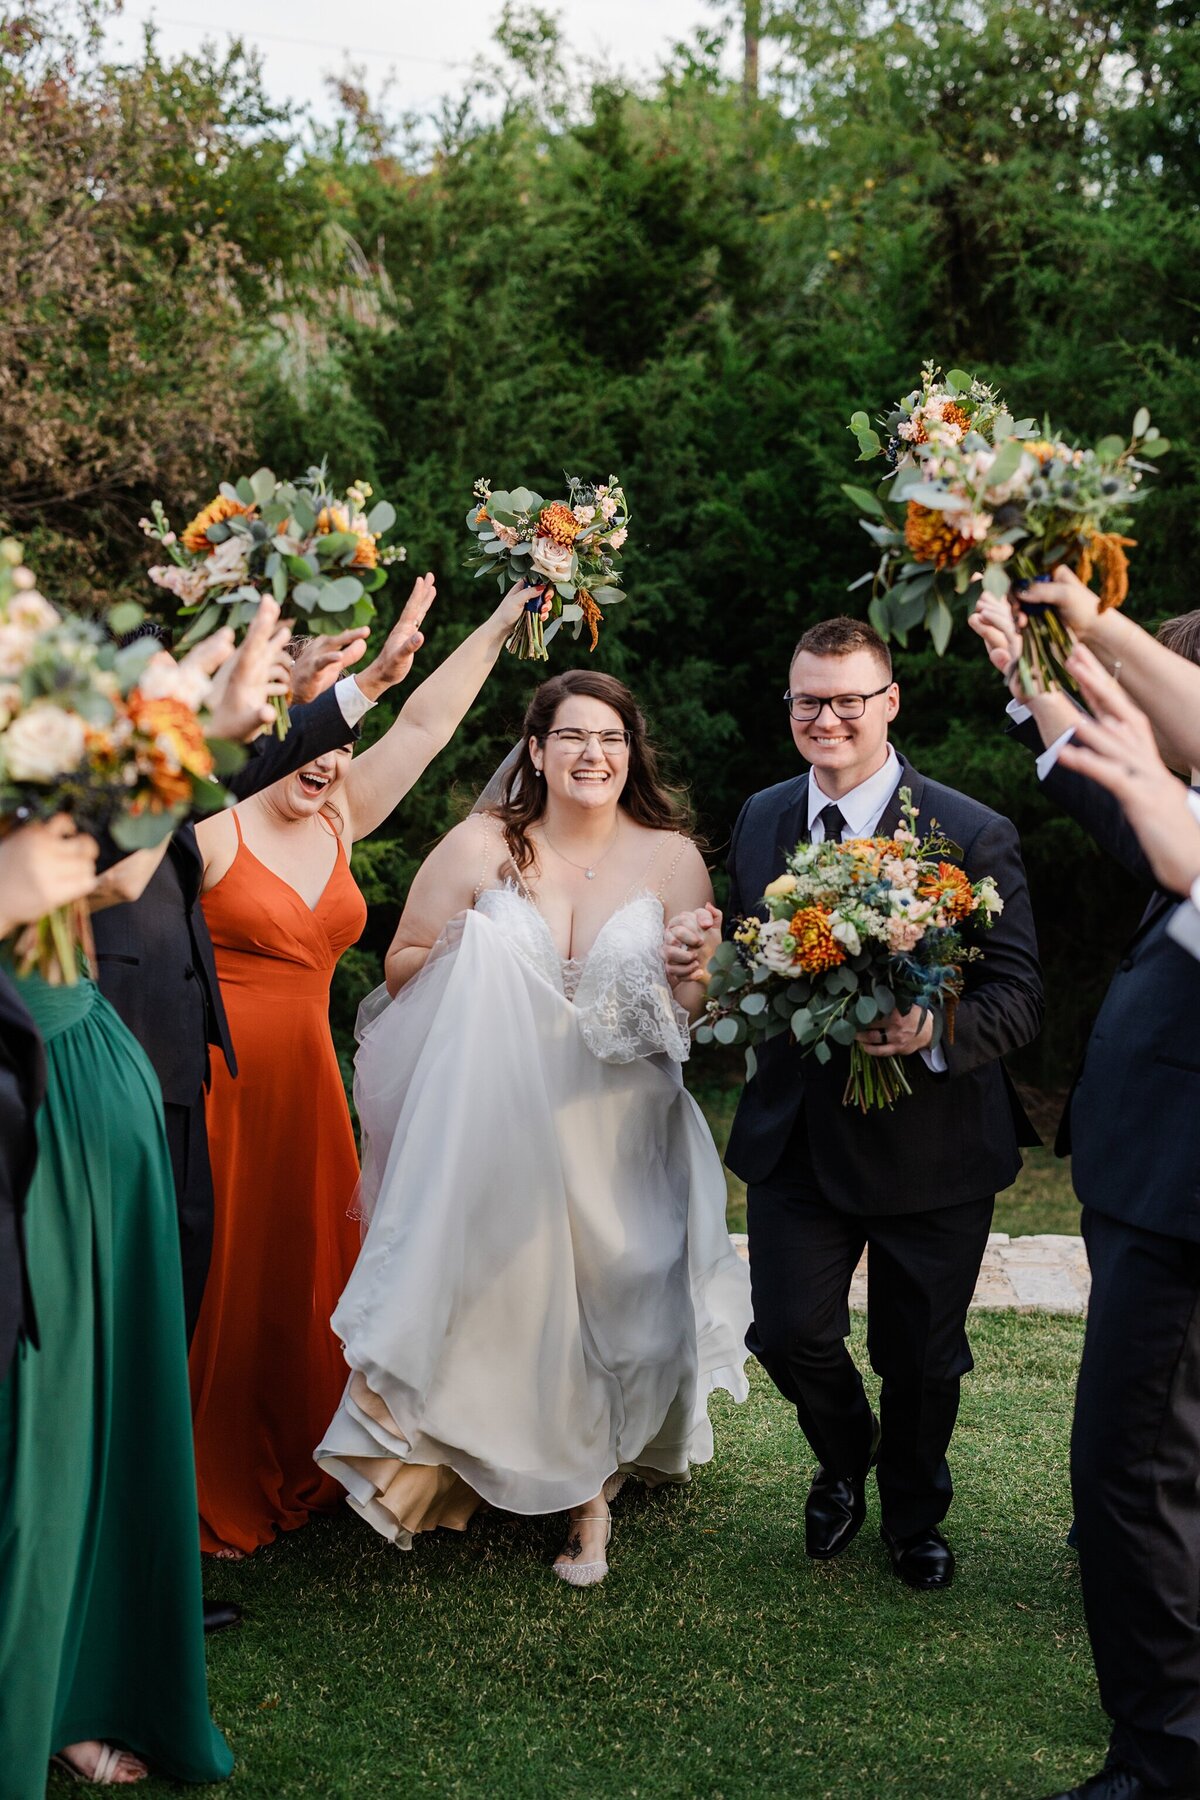 A portrait of a bride and groom walking through a "tunnel" made by their wedding party and their bouquets and arms after on their wedding day at The Laurel in Grapevine, Texas. The bride is on the left and is wearing a sleeveless, long, intricate, white dress. The groom is on the right and is wearing dark suit with a tie and is holding the bride's bouquet. Their wedding party can be seen on either side of them holding up their arms and bouquets in celebration.